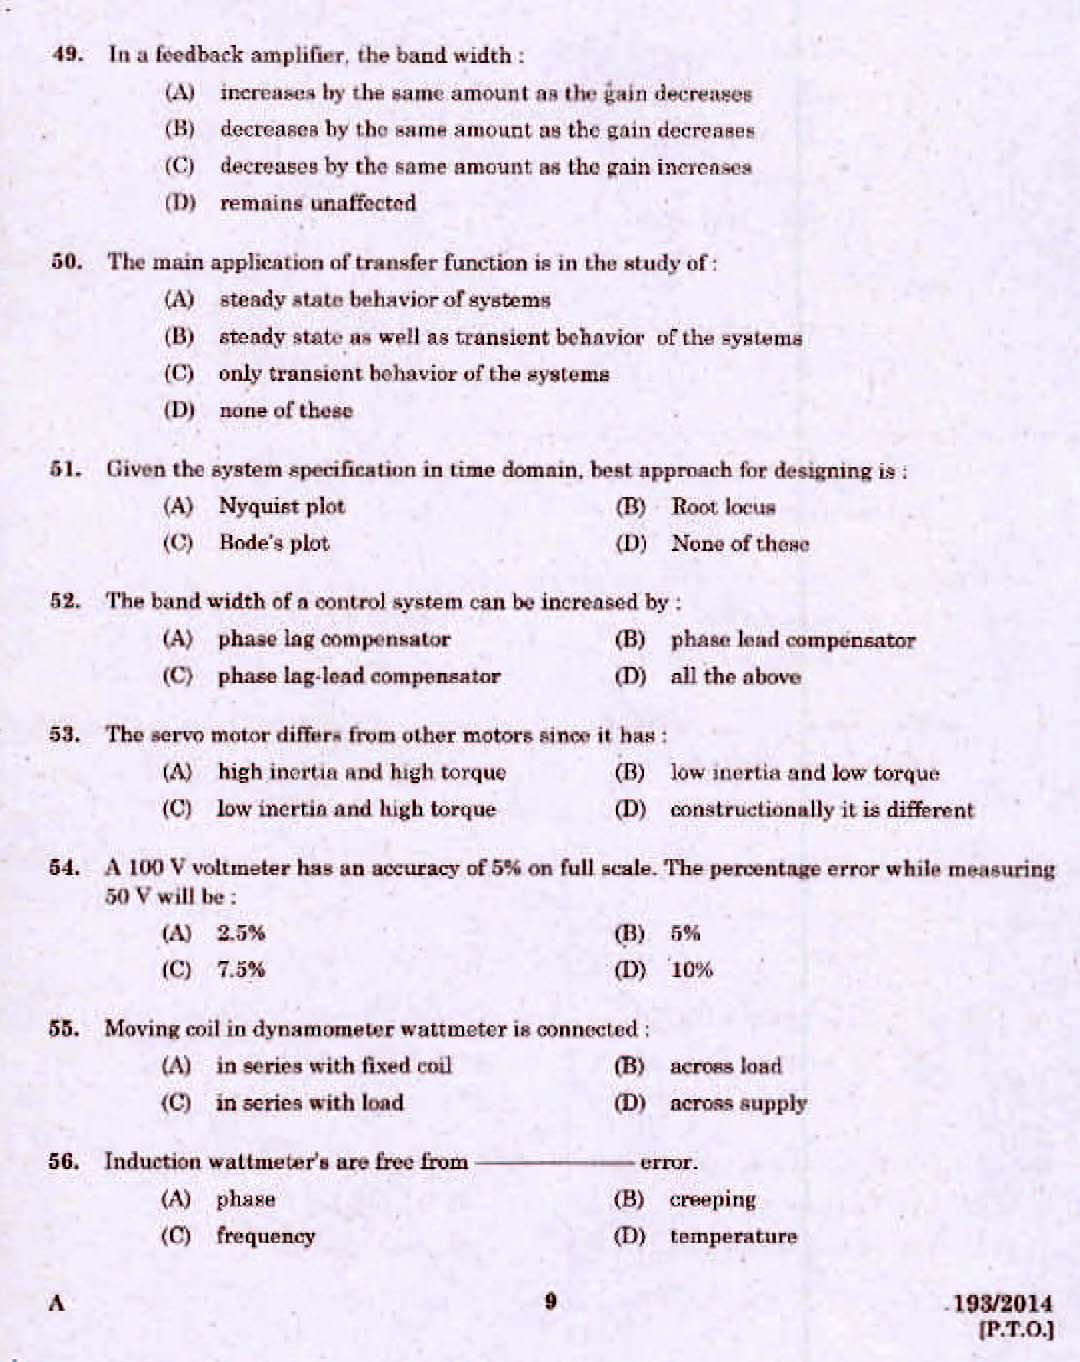 Kerala PSC Assistant Engineer Electrical Exam 2014 Question Paper Code 1932014 7